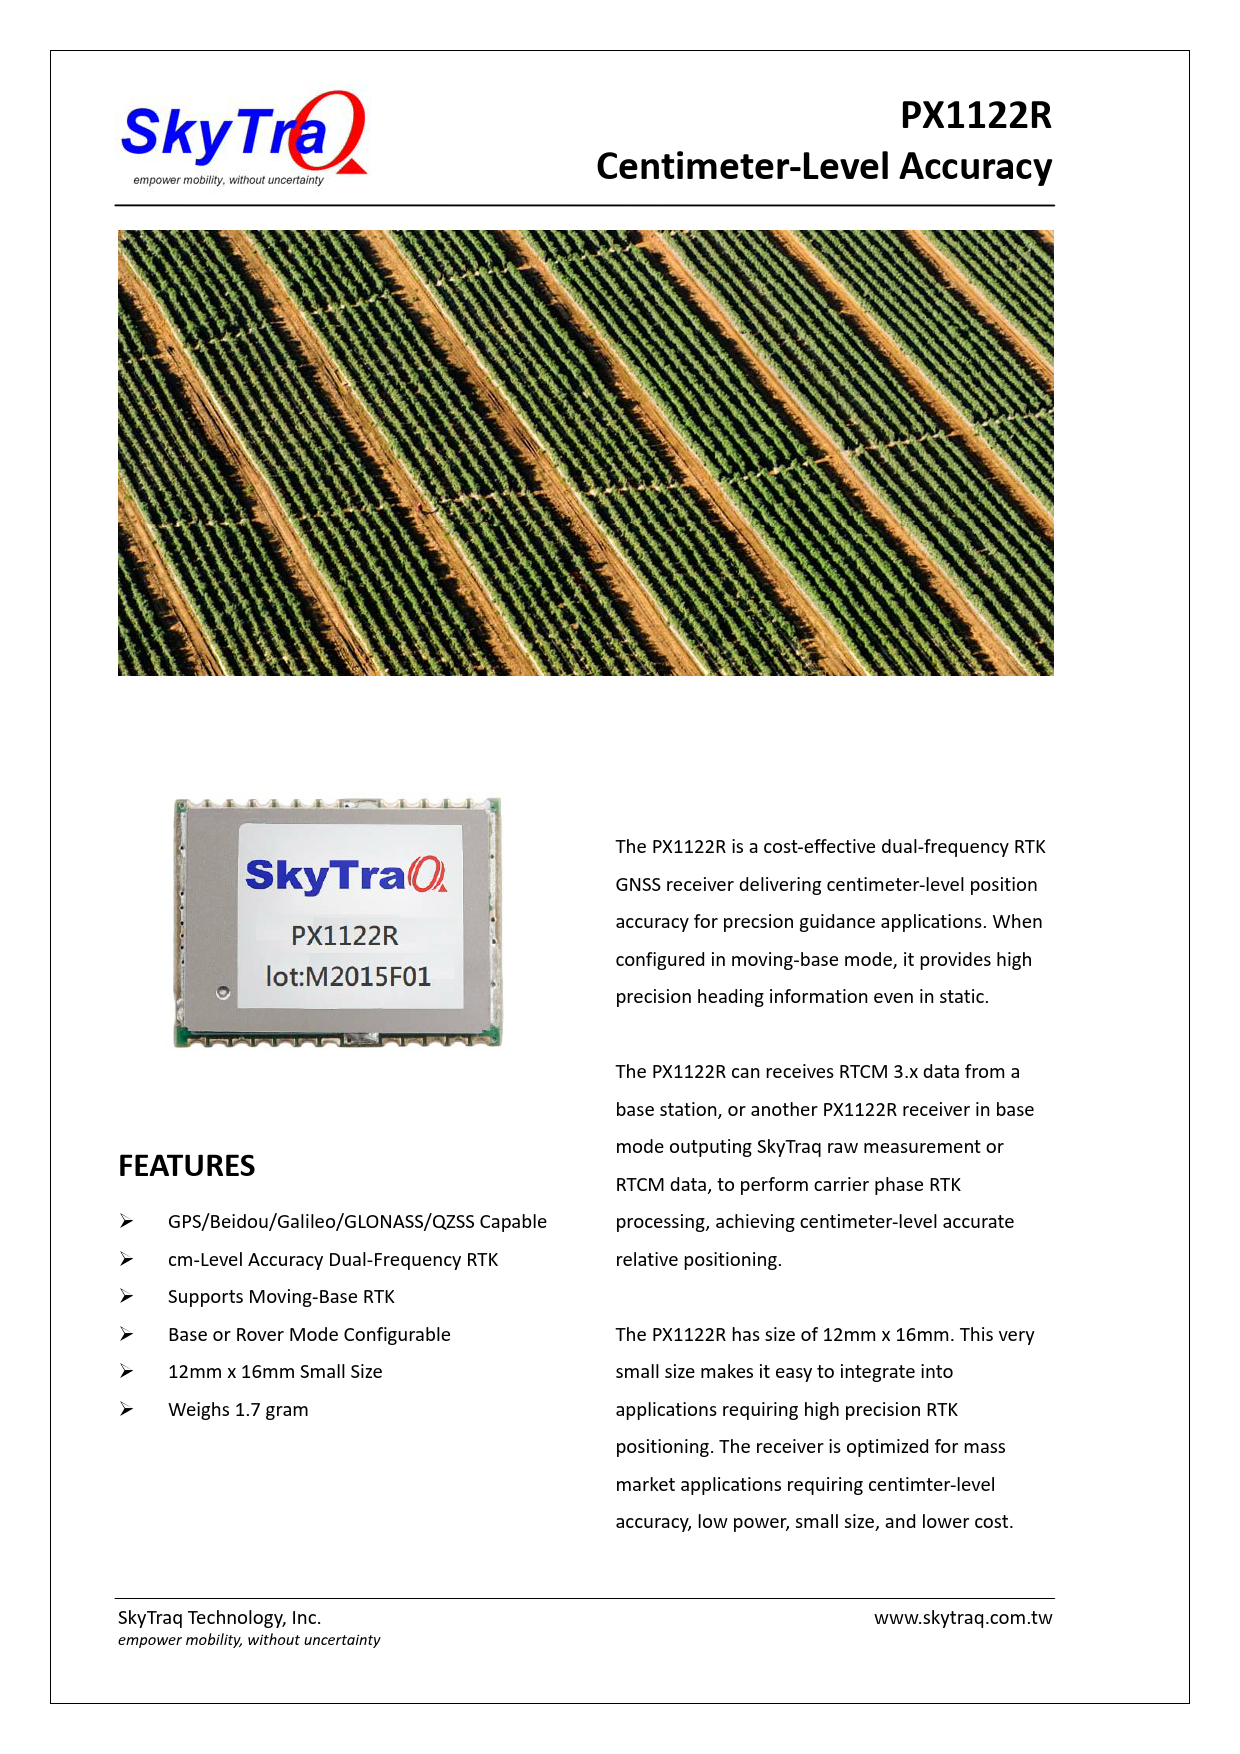 Datasheet PX1122R SkyTraq - Preview and Download